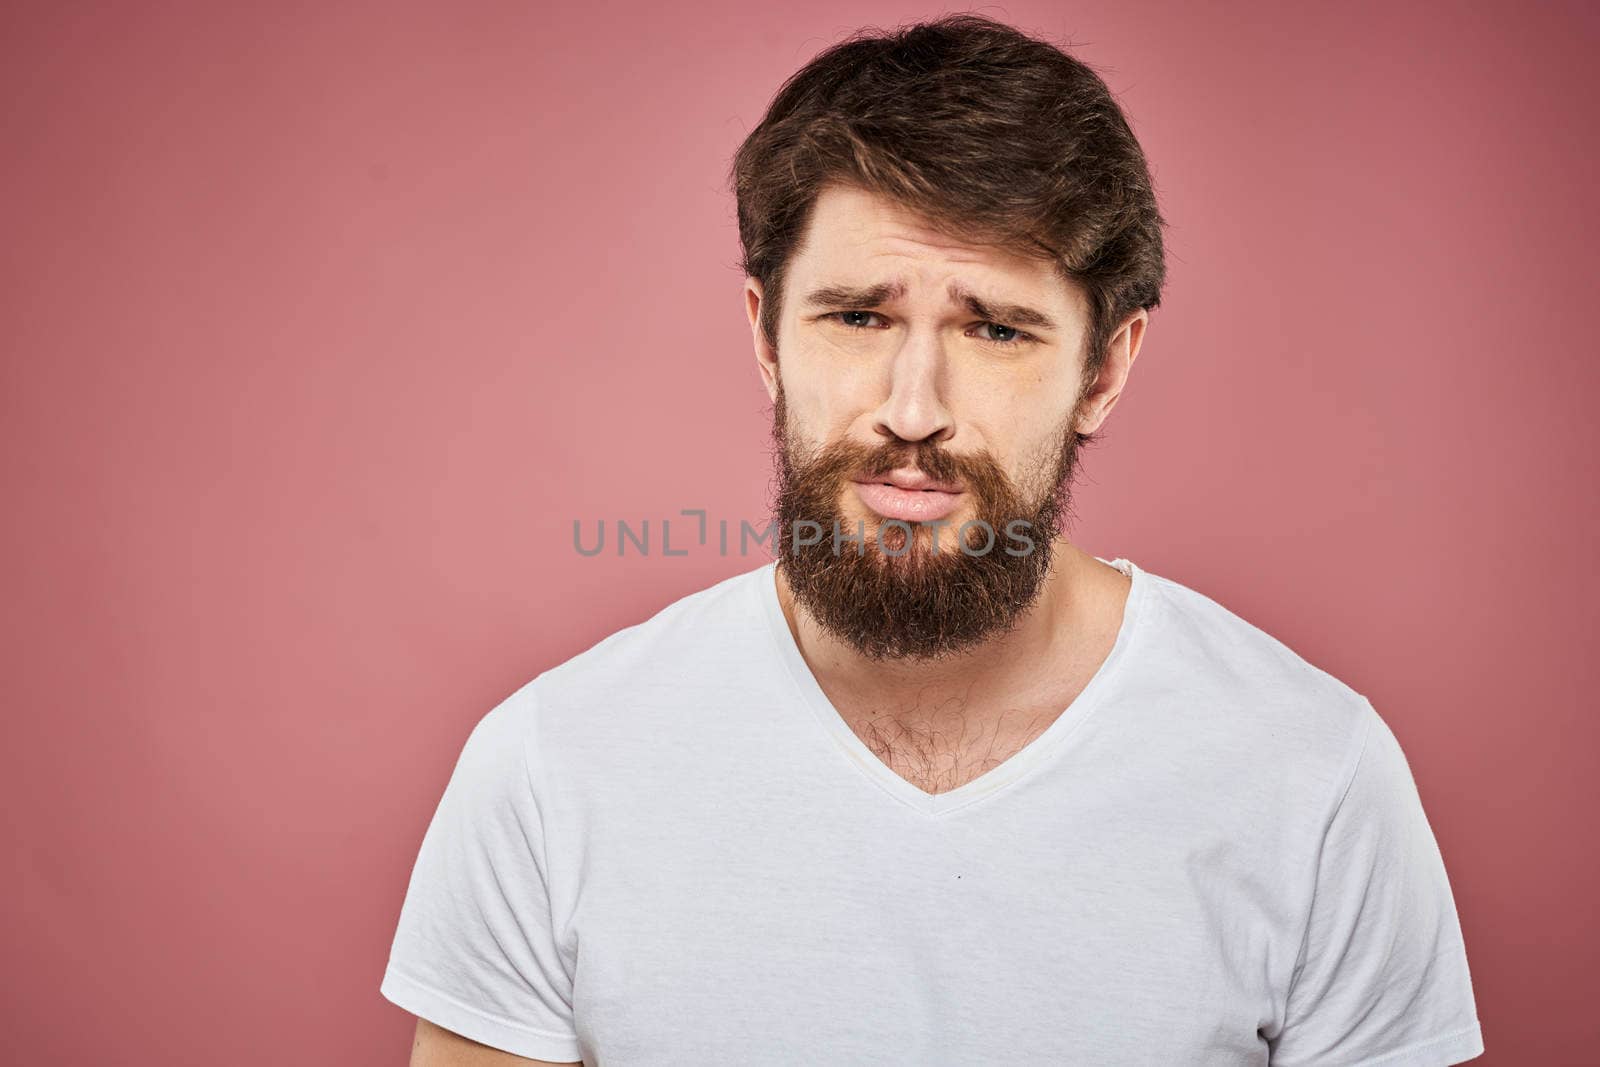 Man in white t-shirt emotions lifestyle facial expression cropped view pink background. by SHOTPRIME